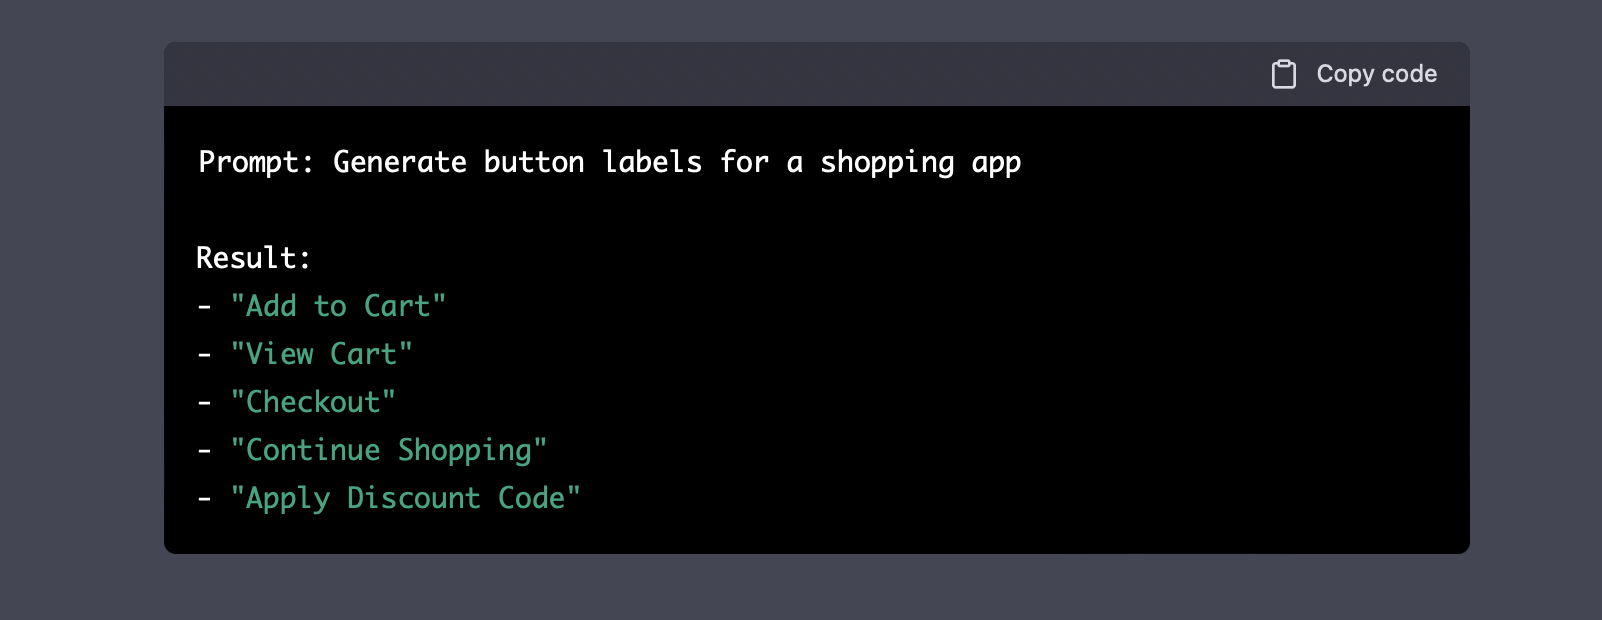 Creating labels for the shopping app